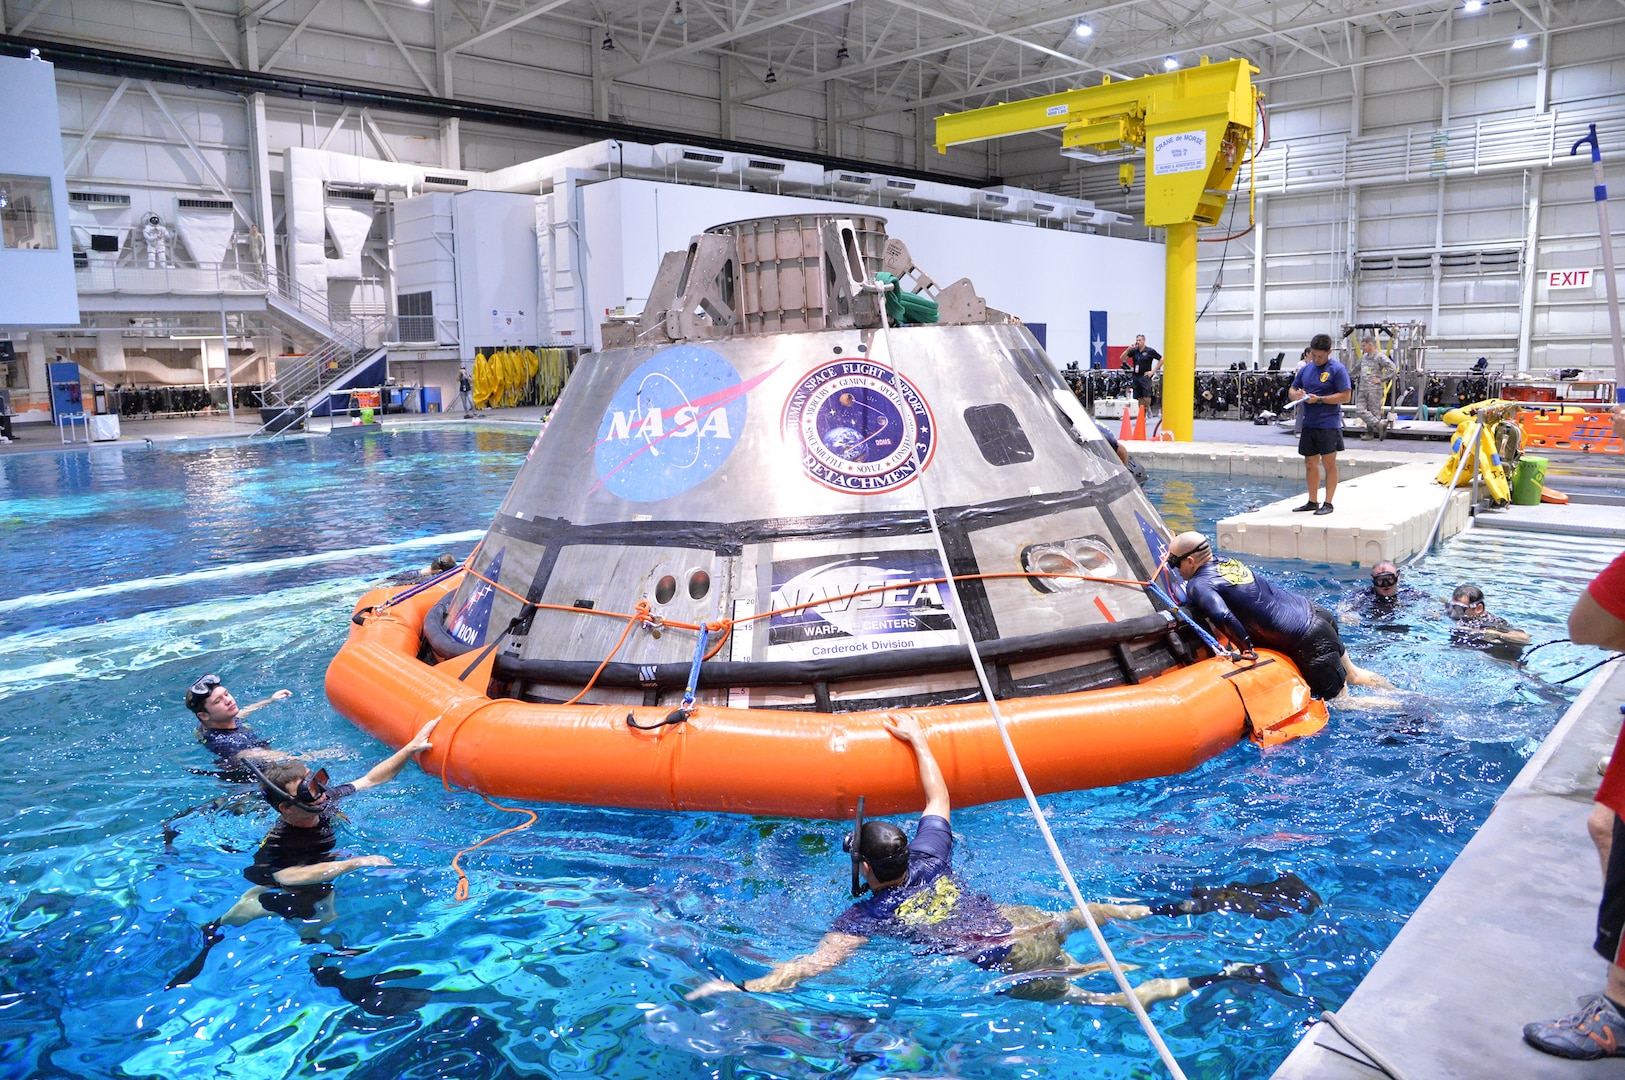 Navy divers, Air Force pararescuemen and Coast Guard rescue swimmers practice Orion recovery techniques at the Neutral Buoyancy Laboratory (NBL) at the agency’s Johnson Space Center in Houston on Sept. 21, 2016. The recovery team is practicing underway recovery techniques using a test version of the Orion spacecraft that was built by Naval Surface Warfare Center, Carderock Division. The Ground Systems Development and Operations Program, along with the U.S. Navy and Lockheed Martin, are preparing the recovery team, hardware and operations to support EM-1 recovery. (NASA photo by James Blair)